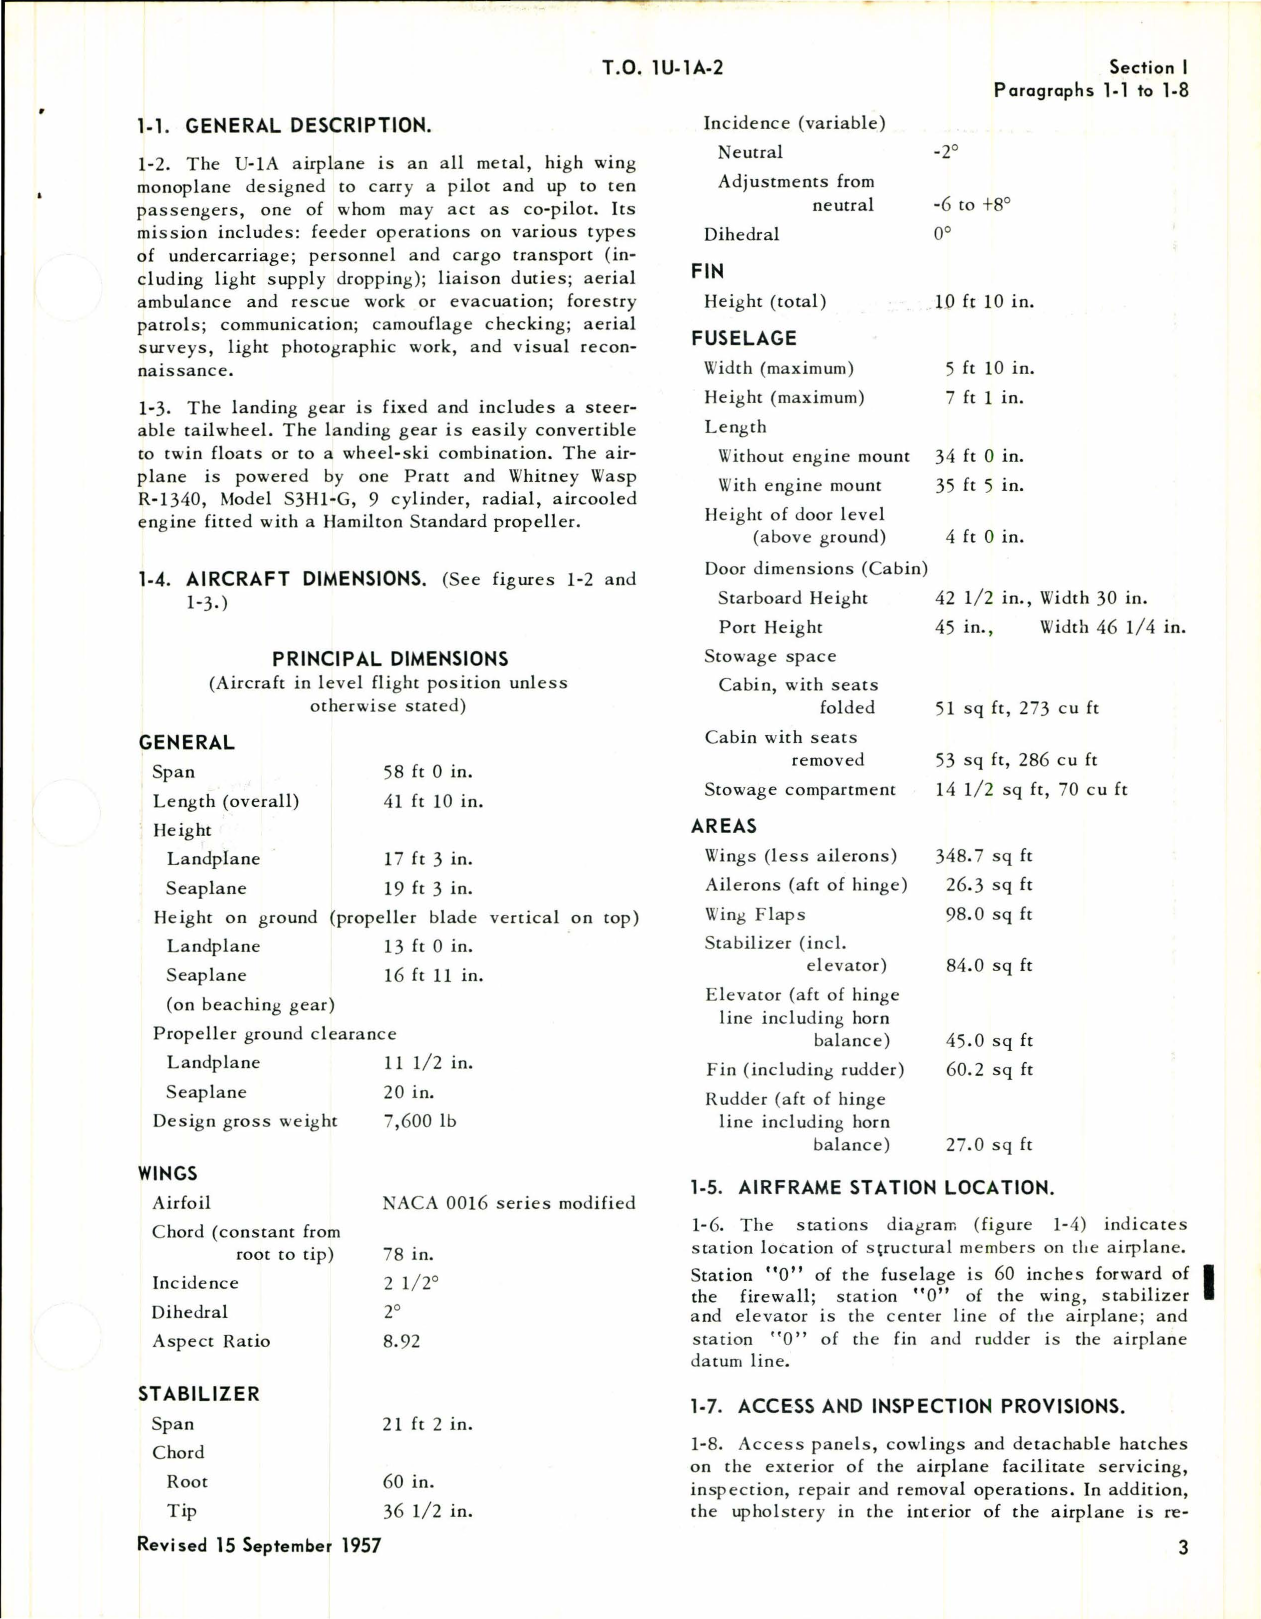 Sample page 5 from AirCorps Library document: Maintenance Instructions for YU-1 and U-1A